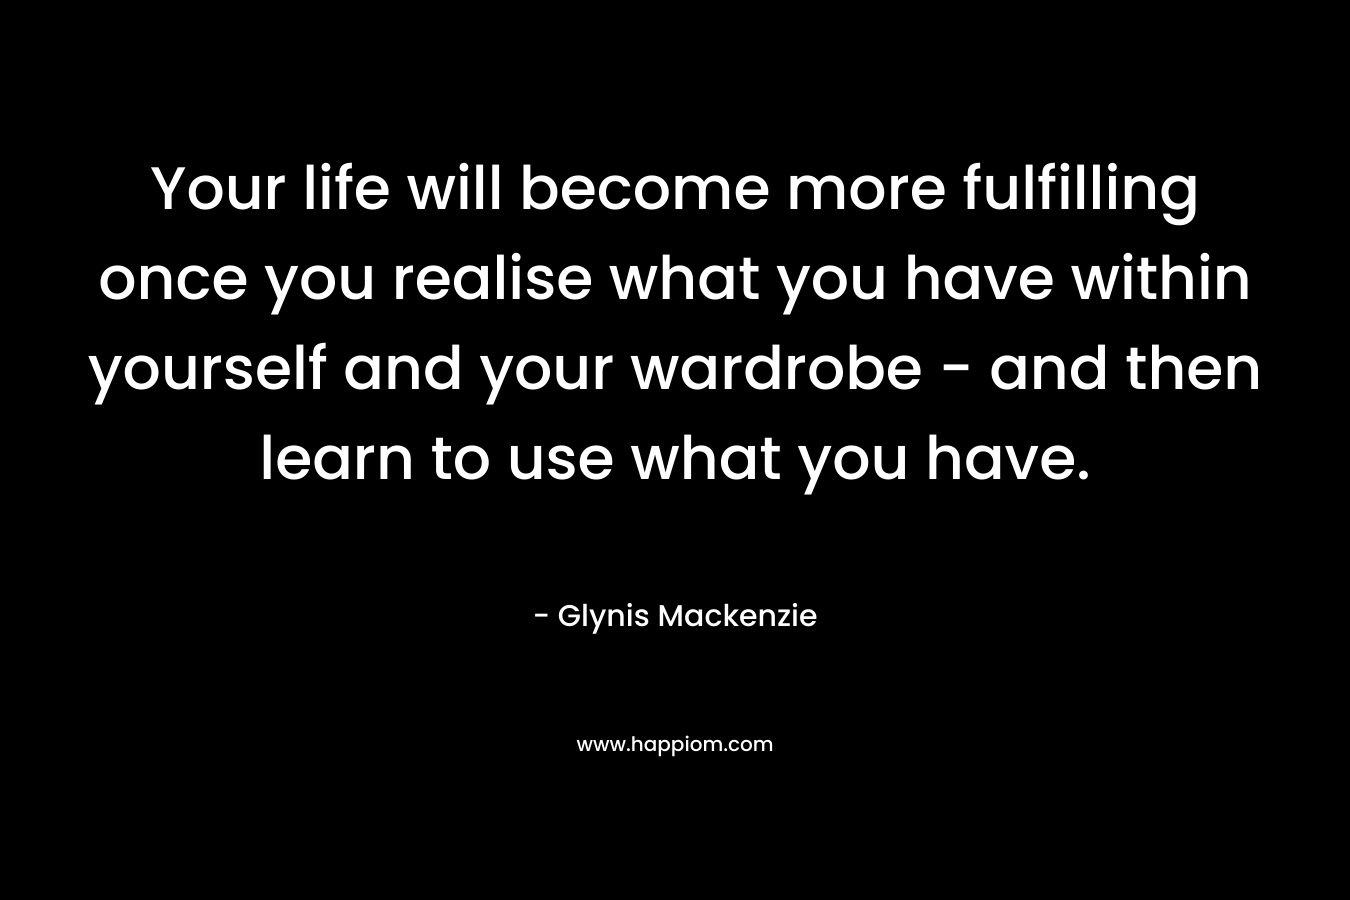 Your life will become more fulfilling once you realise what you have within yourself and your wardrobe - and then learn to use what you have.